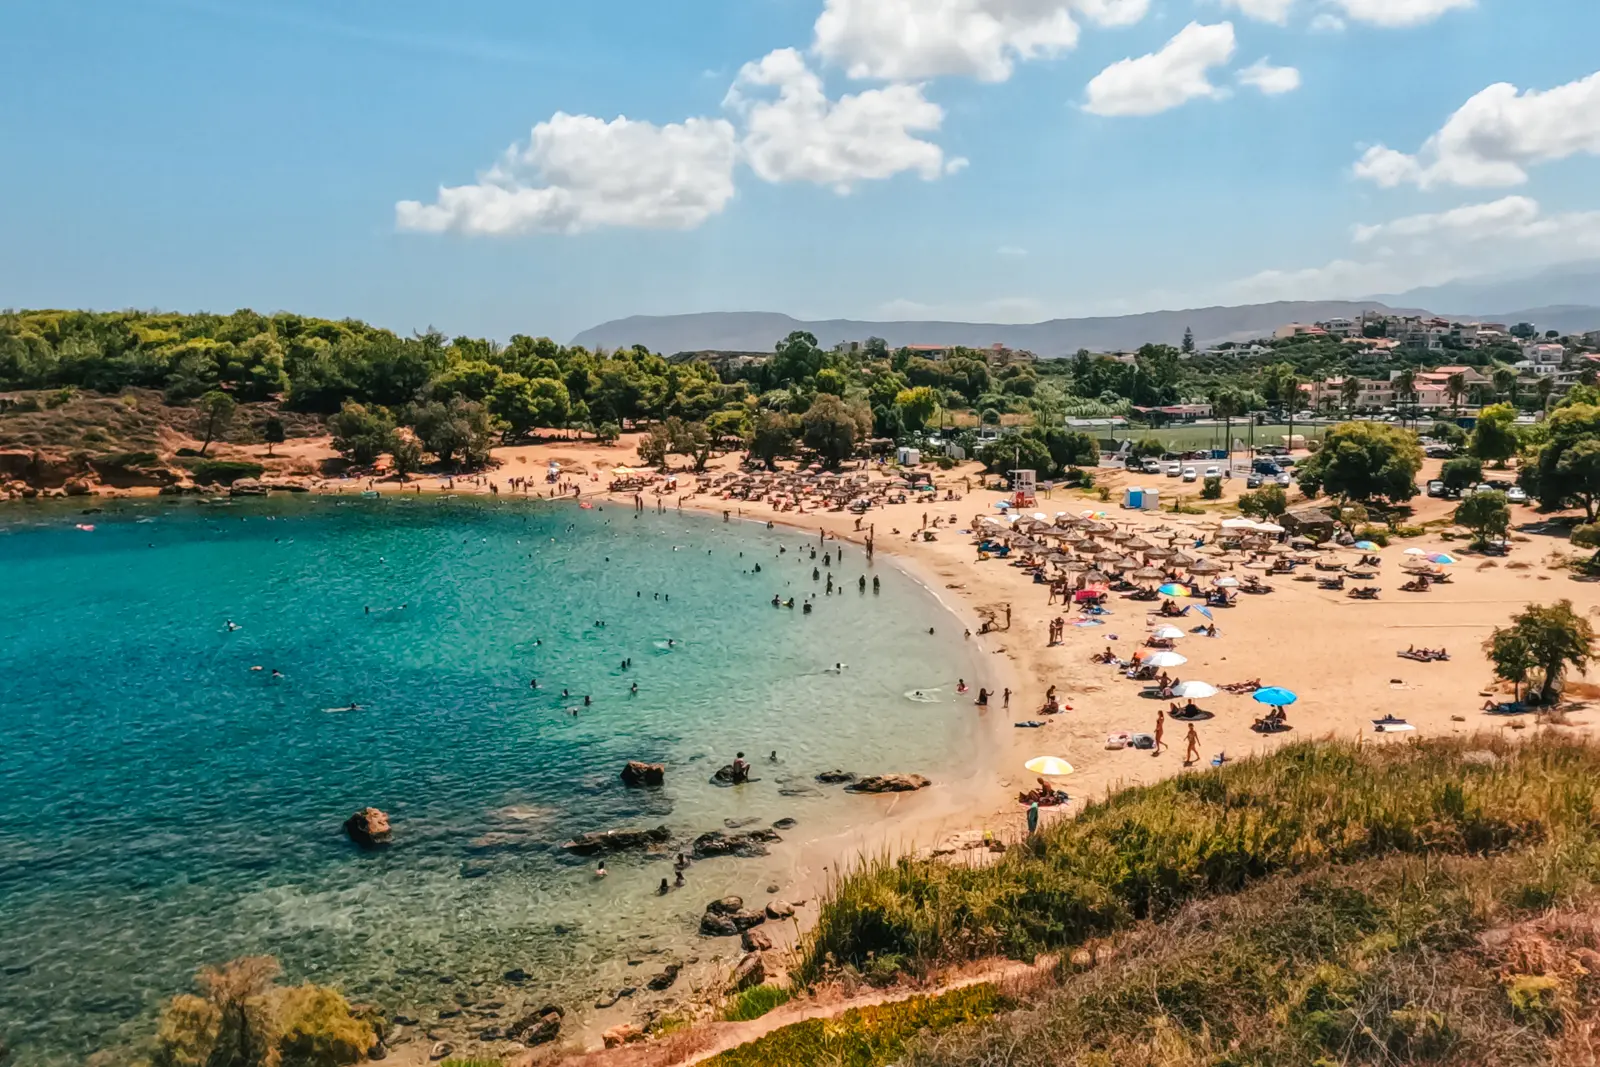 View from a hill on the south side of Agii Apostoli golden bay of sand with two sections of sunbeds and shallow turquoise water, one of the closest beaches to Chania Crete.